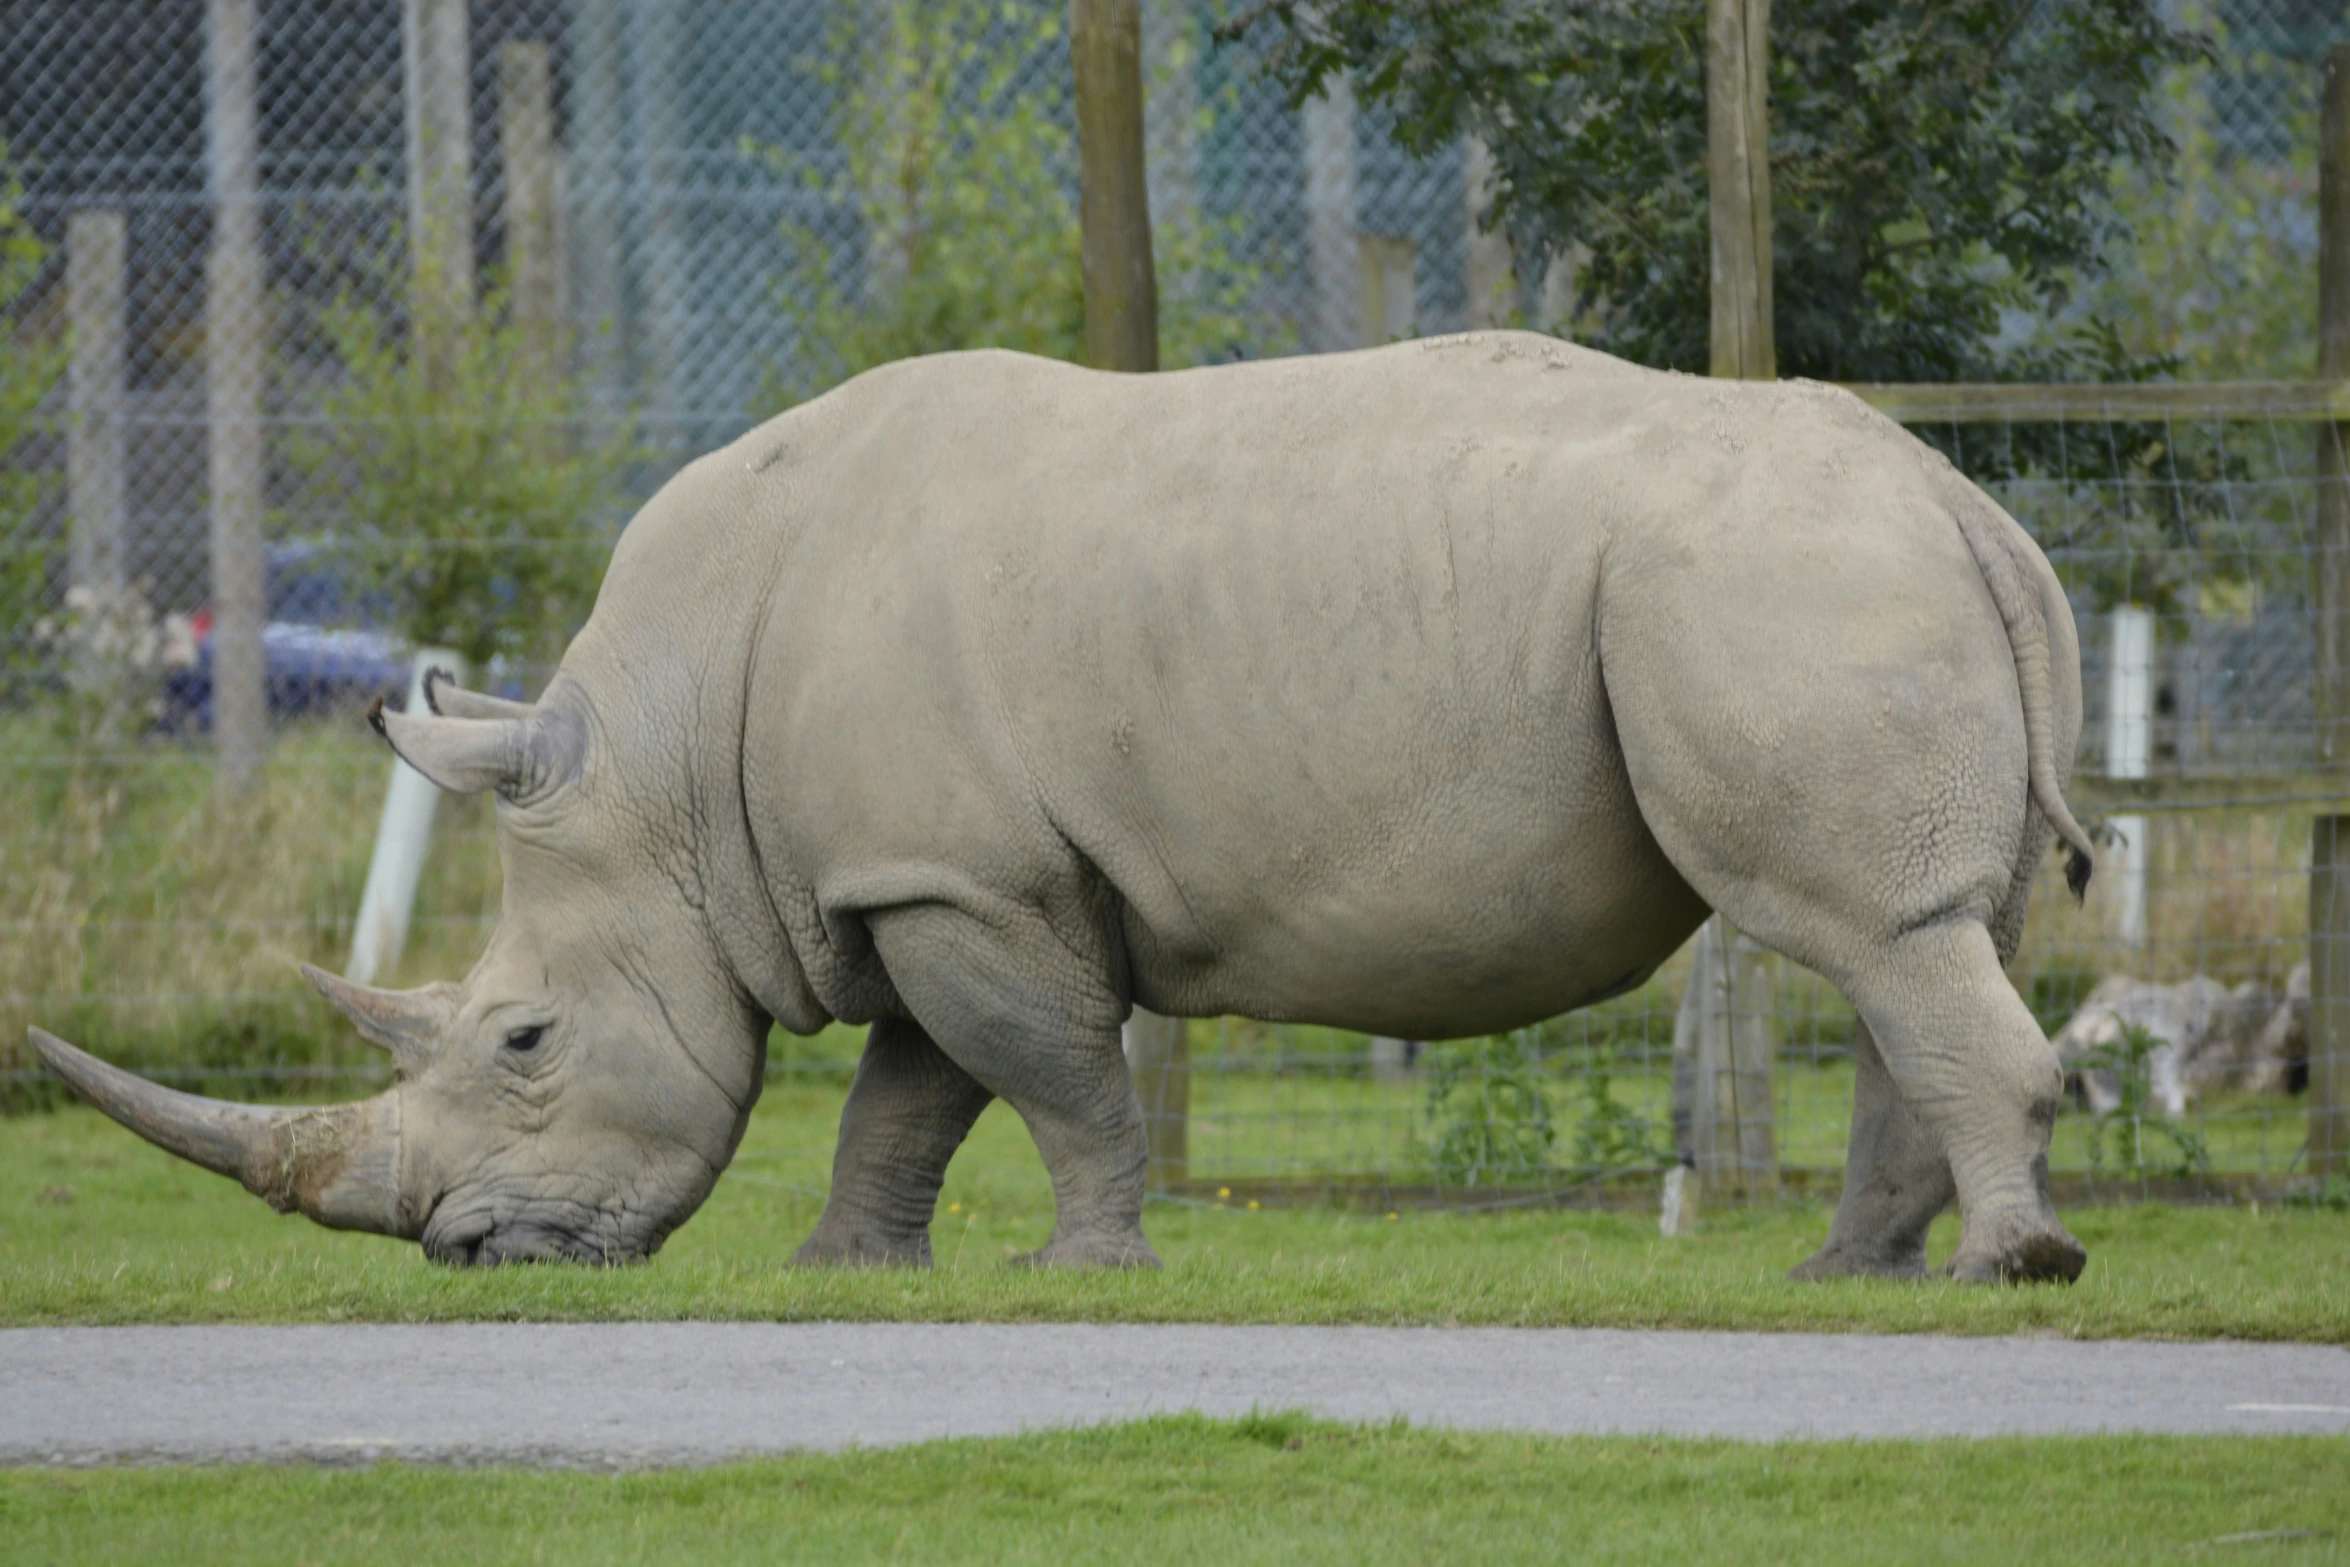 the rhinoceros are eating grass by the fence